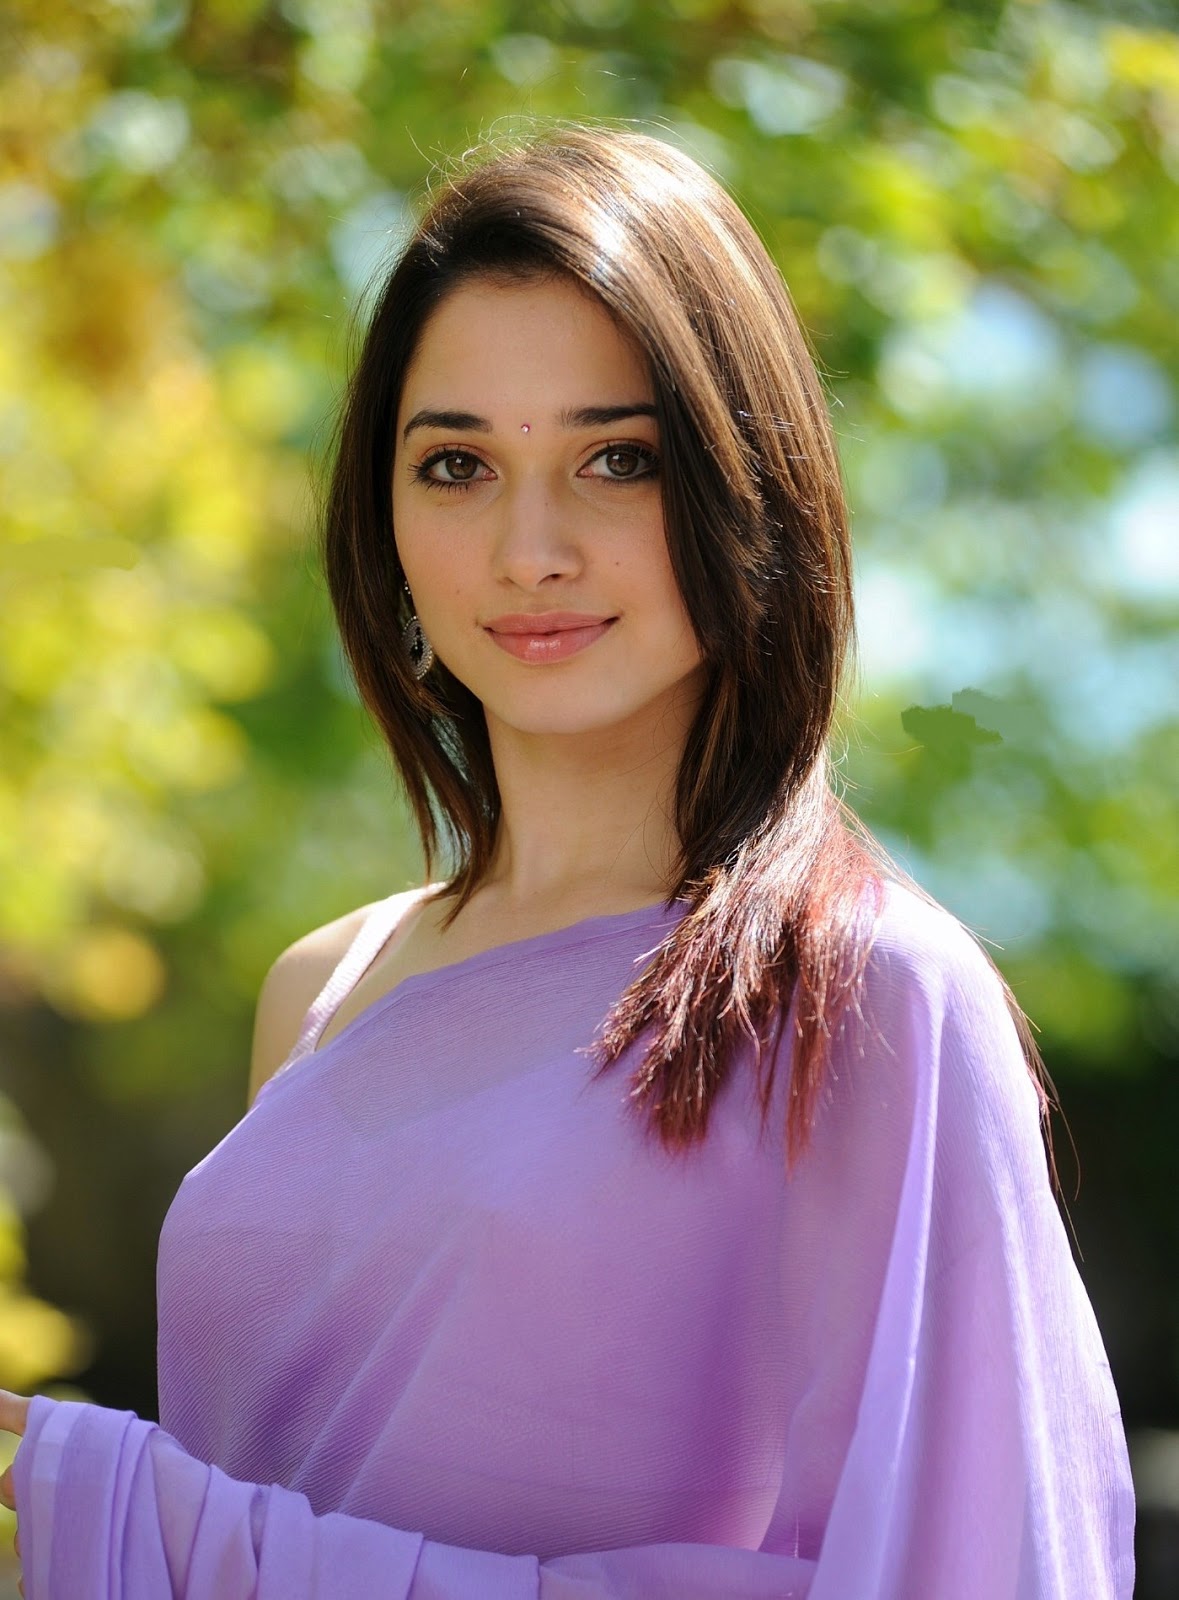 High Quality Bollywood Celebrity Pictures: Tamanna Bhatia Looks ...